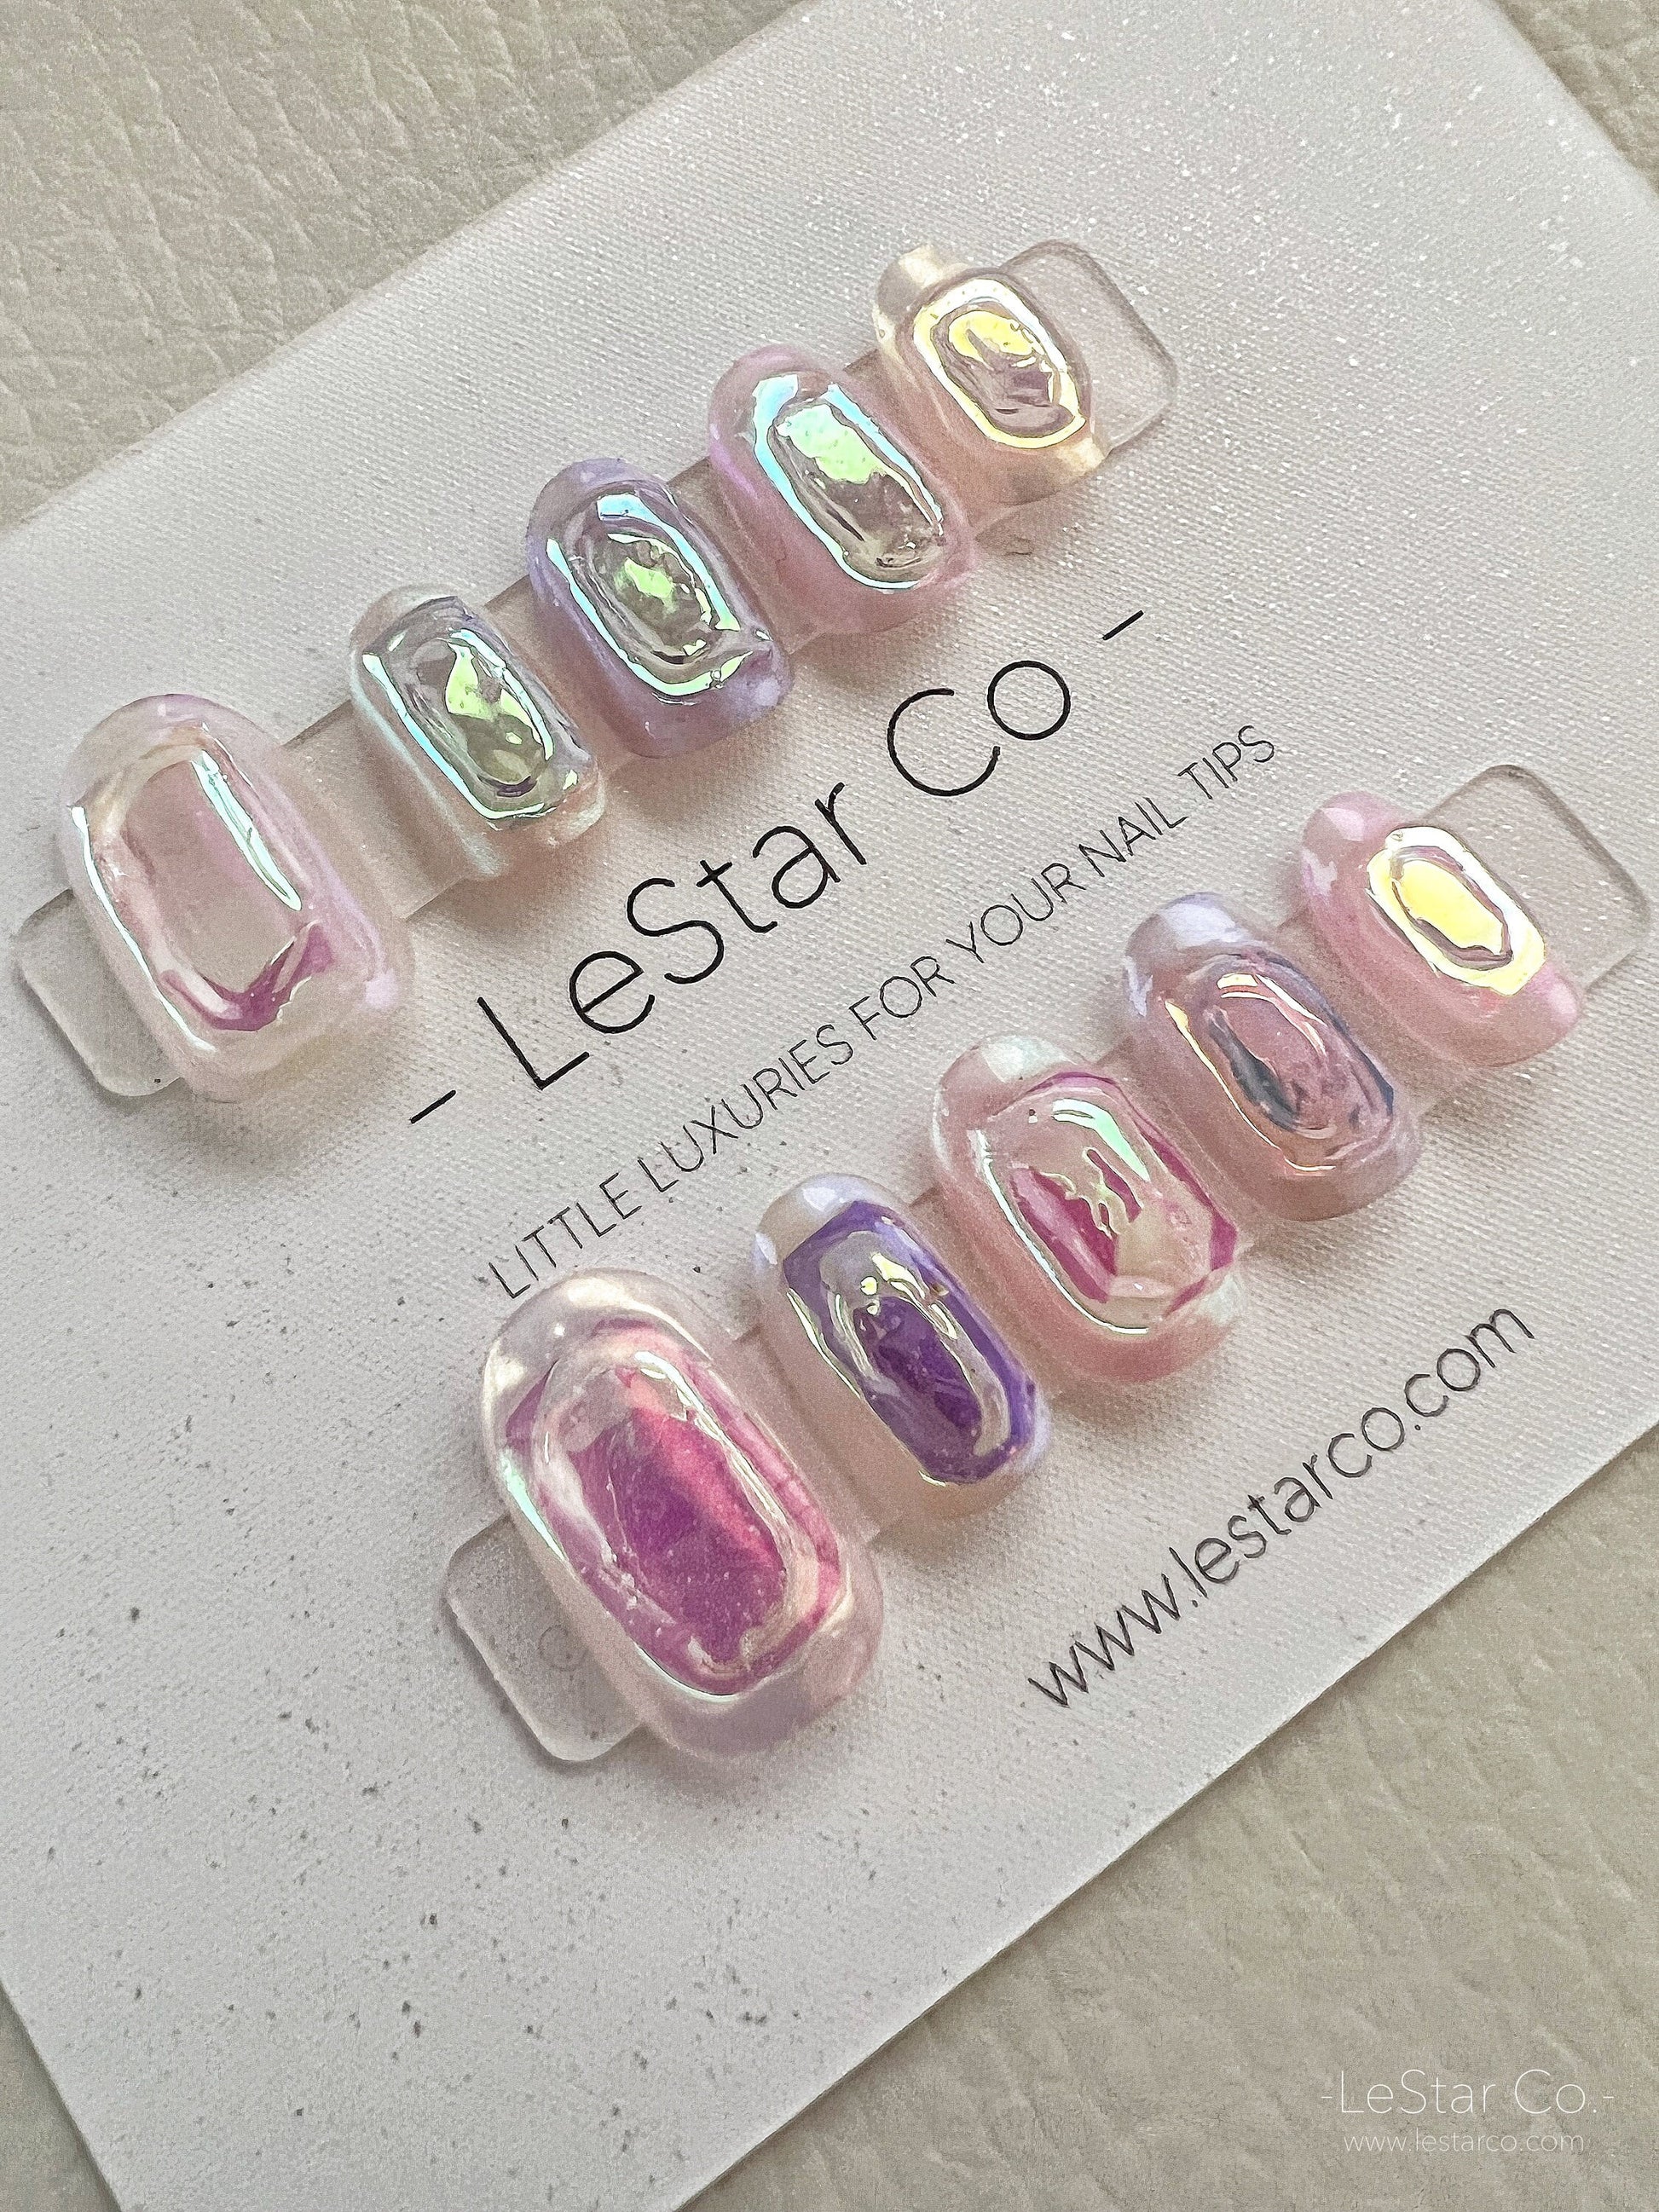 Reusable Iridescent Icy Premium Short Press on Nails Gel Manicure | Fake Nails | Handmade | Lestarco faux nails 132zz